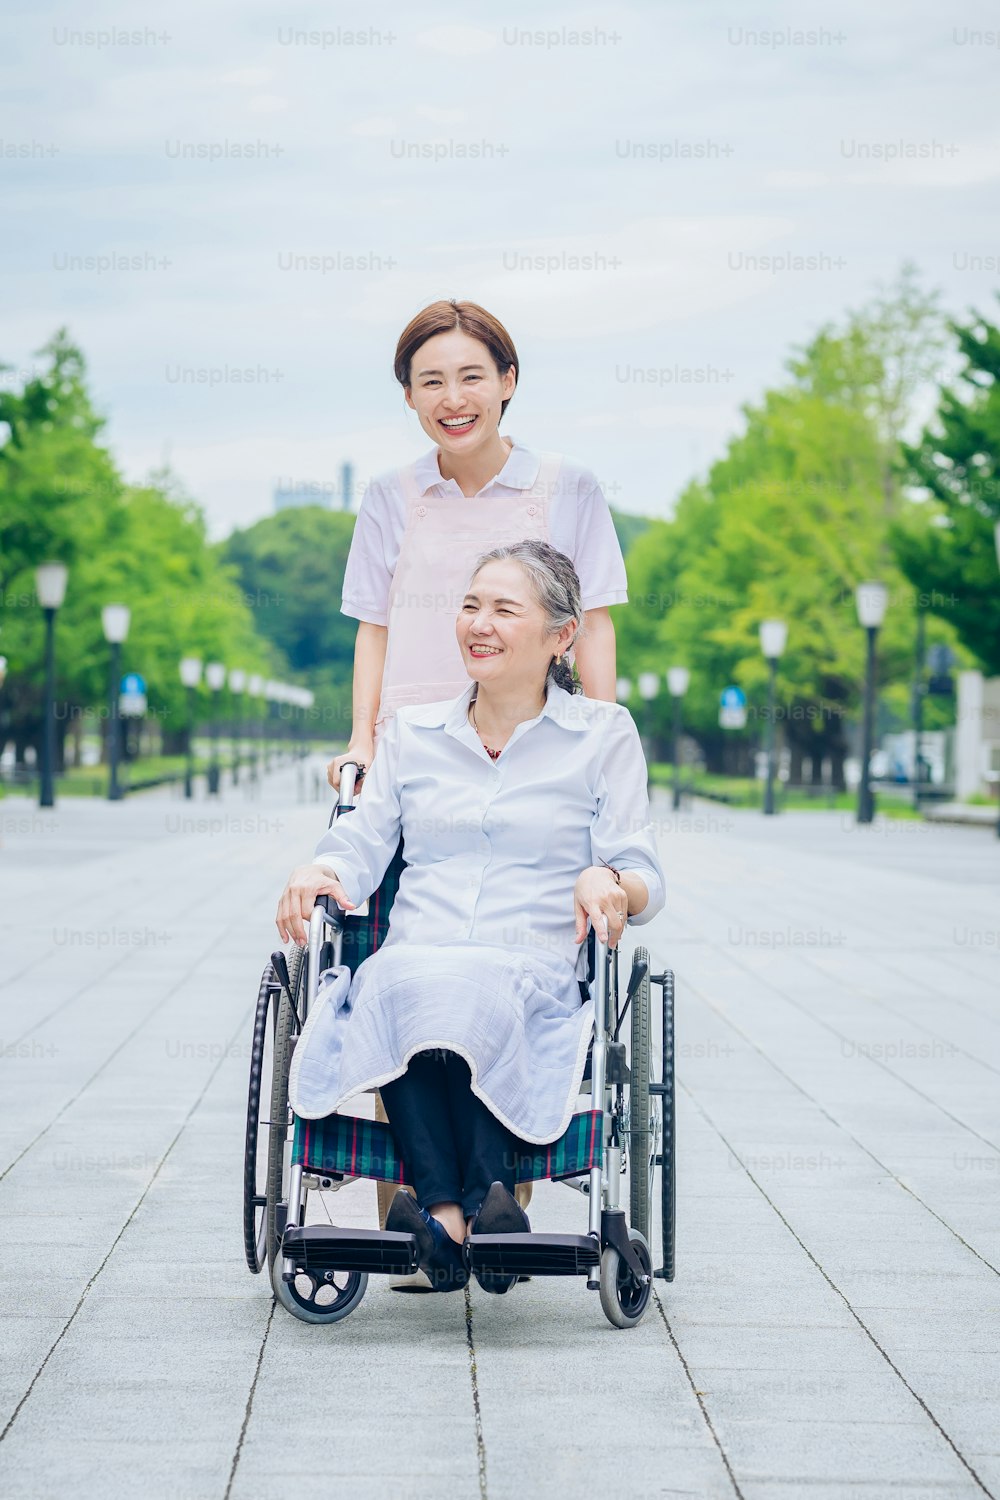 A woman in a wheelchair and young woman in an apron to care for outdoors